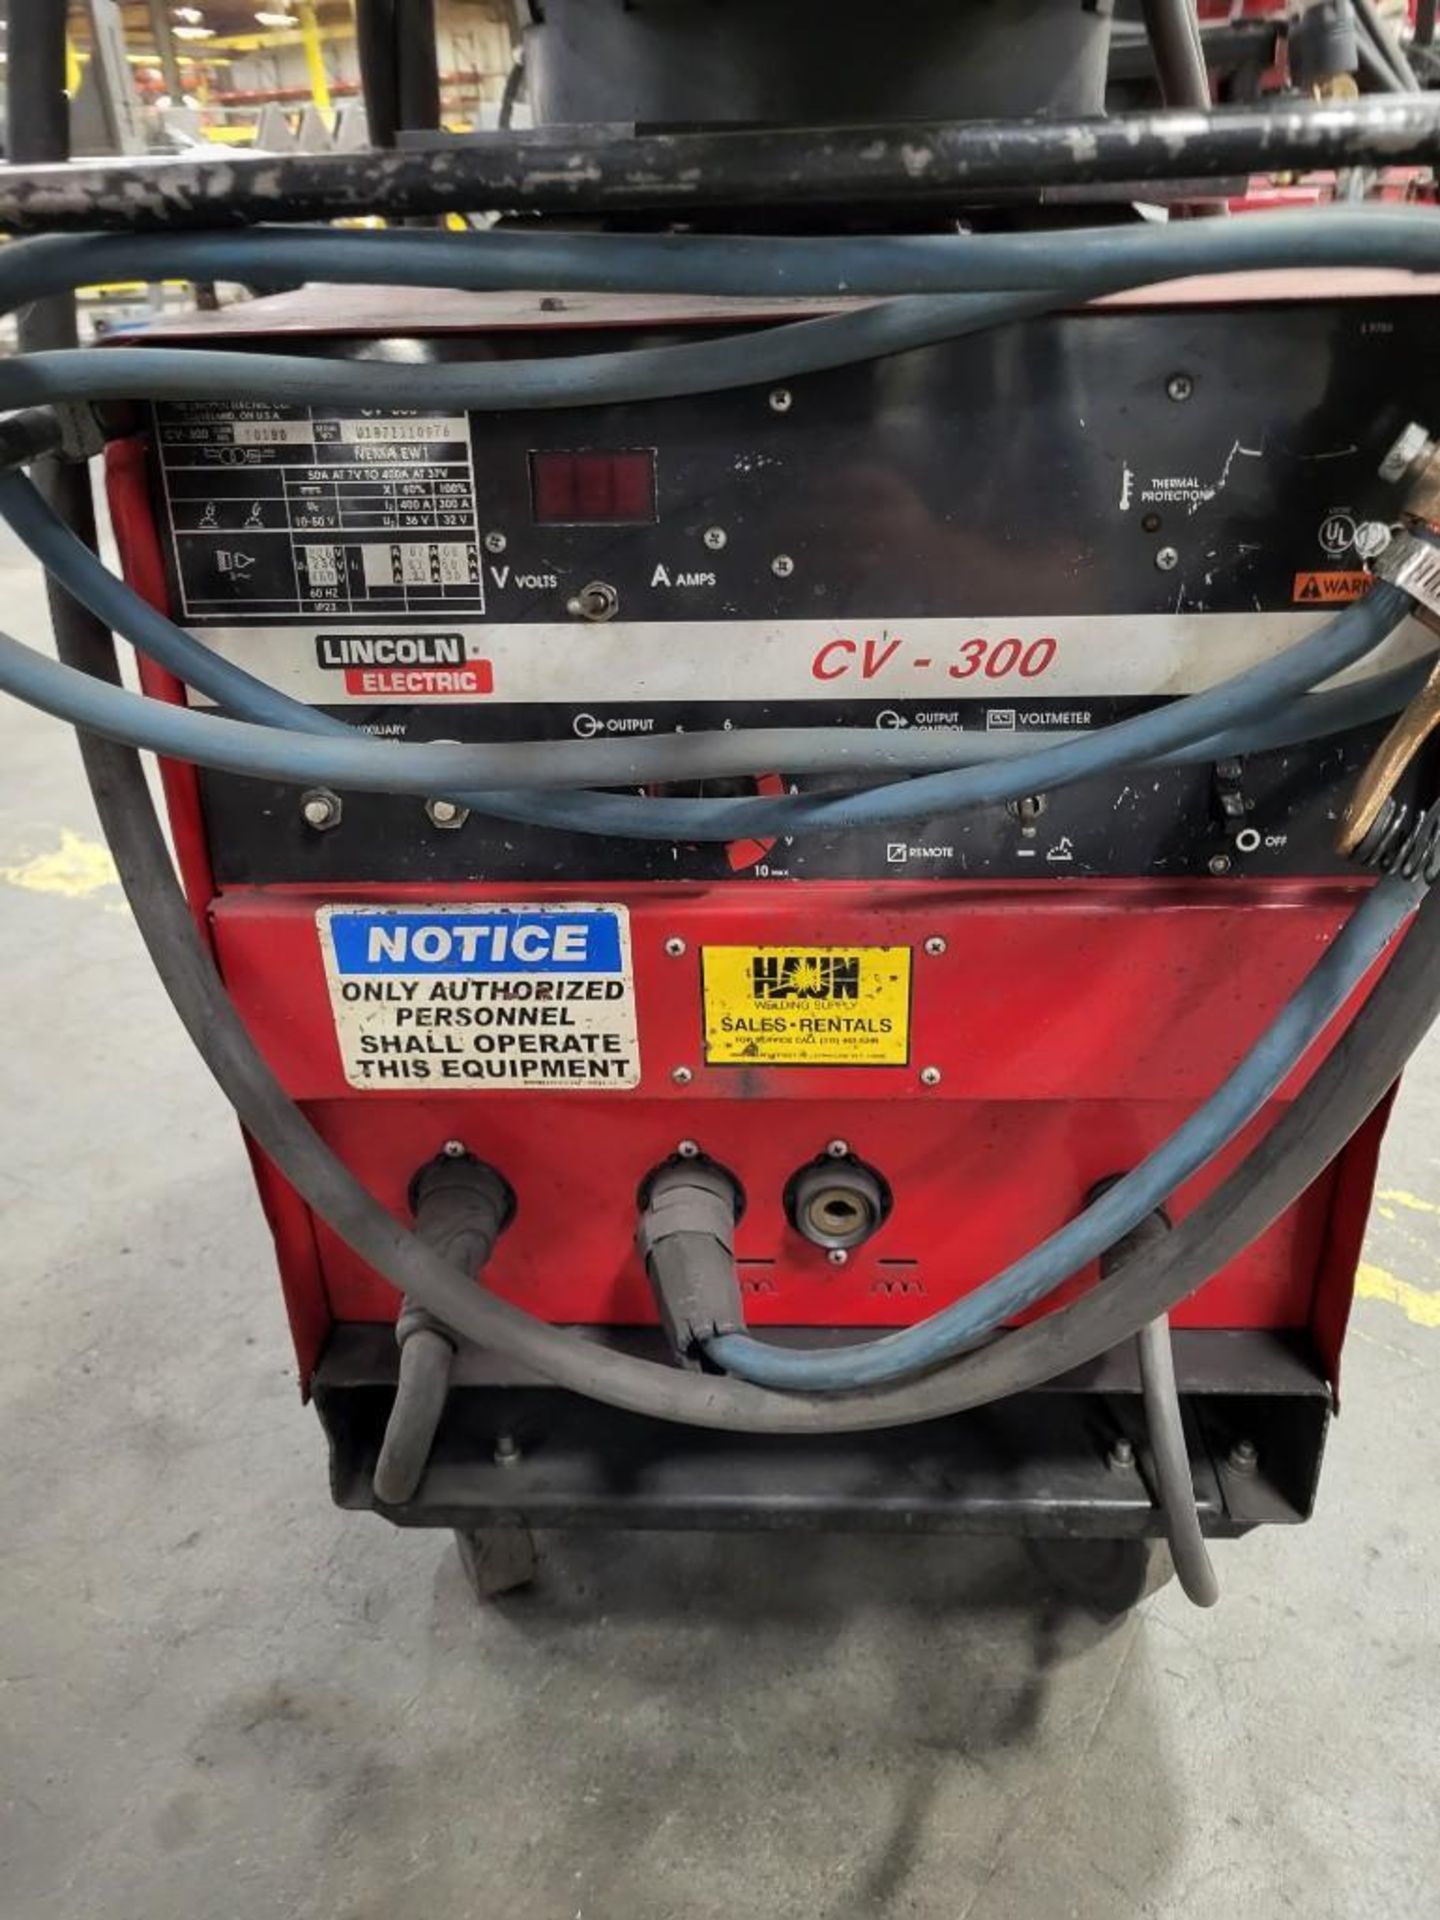 LINCOLN ELECTRIC IDEALARC CV-300 MIG WELDER WITH LN-7 WIRE FEEDER - Image 6 of 8